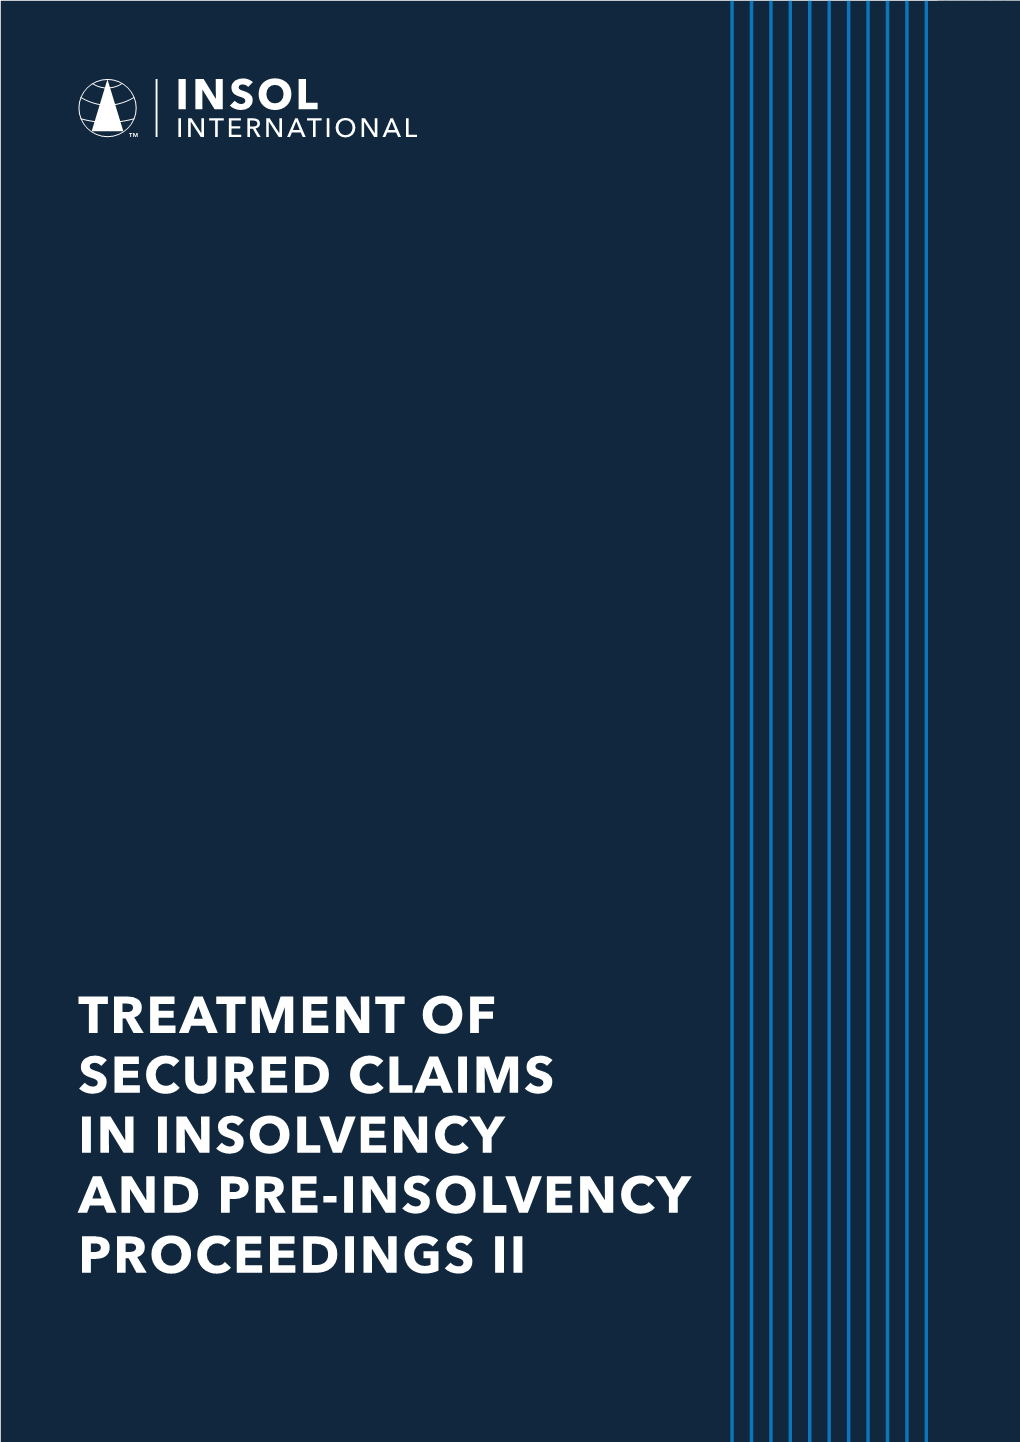 TREATMENT of SECURED CLAIMS in INSOLVENCY and PRE-INSOLVENCY PROCEEDINGS II International Association of Restructuring, Insolvency & Bankruptcy Professionals